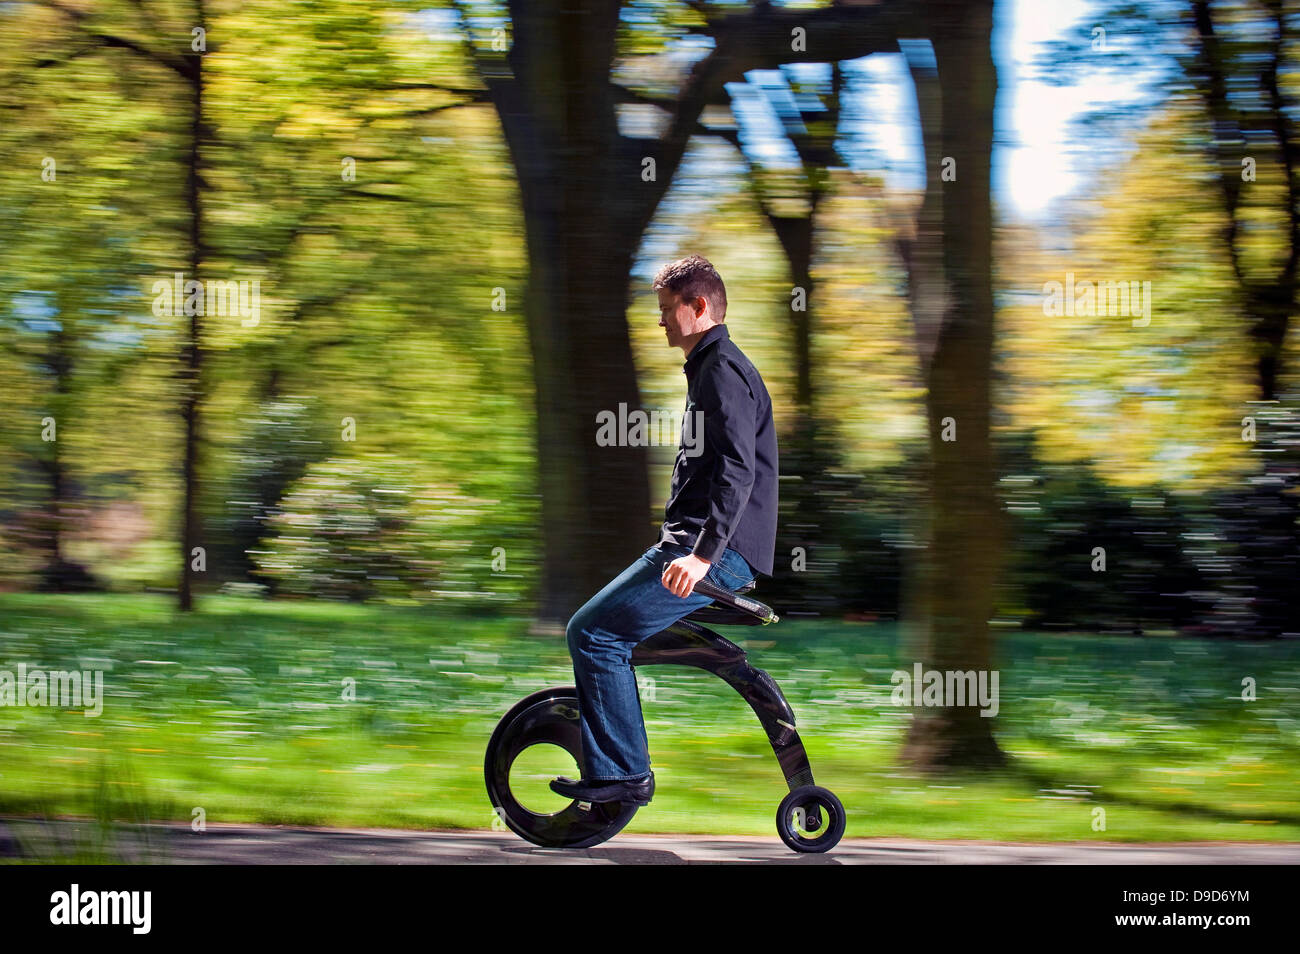 The YikeBike goes international YikeBike, the compact electric bike named by Time Magazine as one of the top inventions of 2009, has won the Supreme Award for Product Design and Gold Award for Consumer Product at the 2010 Best Design Awards. YikeBike also won first place in the International Design Awards “Urban Sustainable Design” category and has been included in the Guinness Book of World records as the most compact electric bike in the world. It has also won a 2011 iF product design award.  YikeBikes can be bought exclusively at the YikeBike online shop. They are for sale in Europe, US, Stock Photo